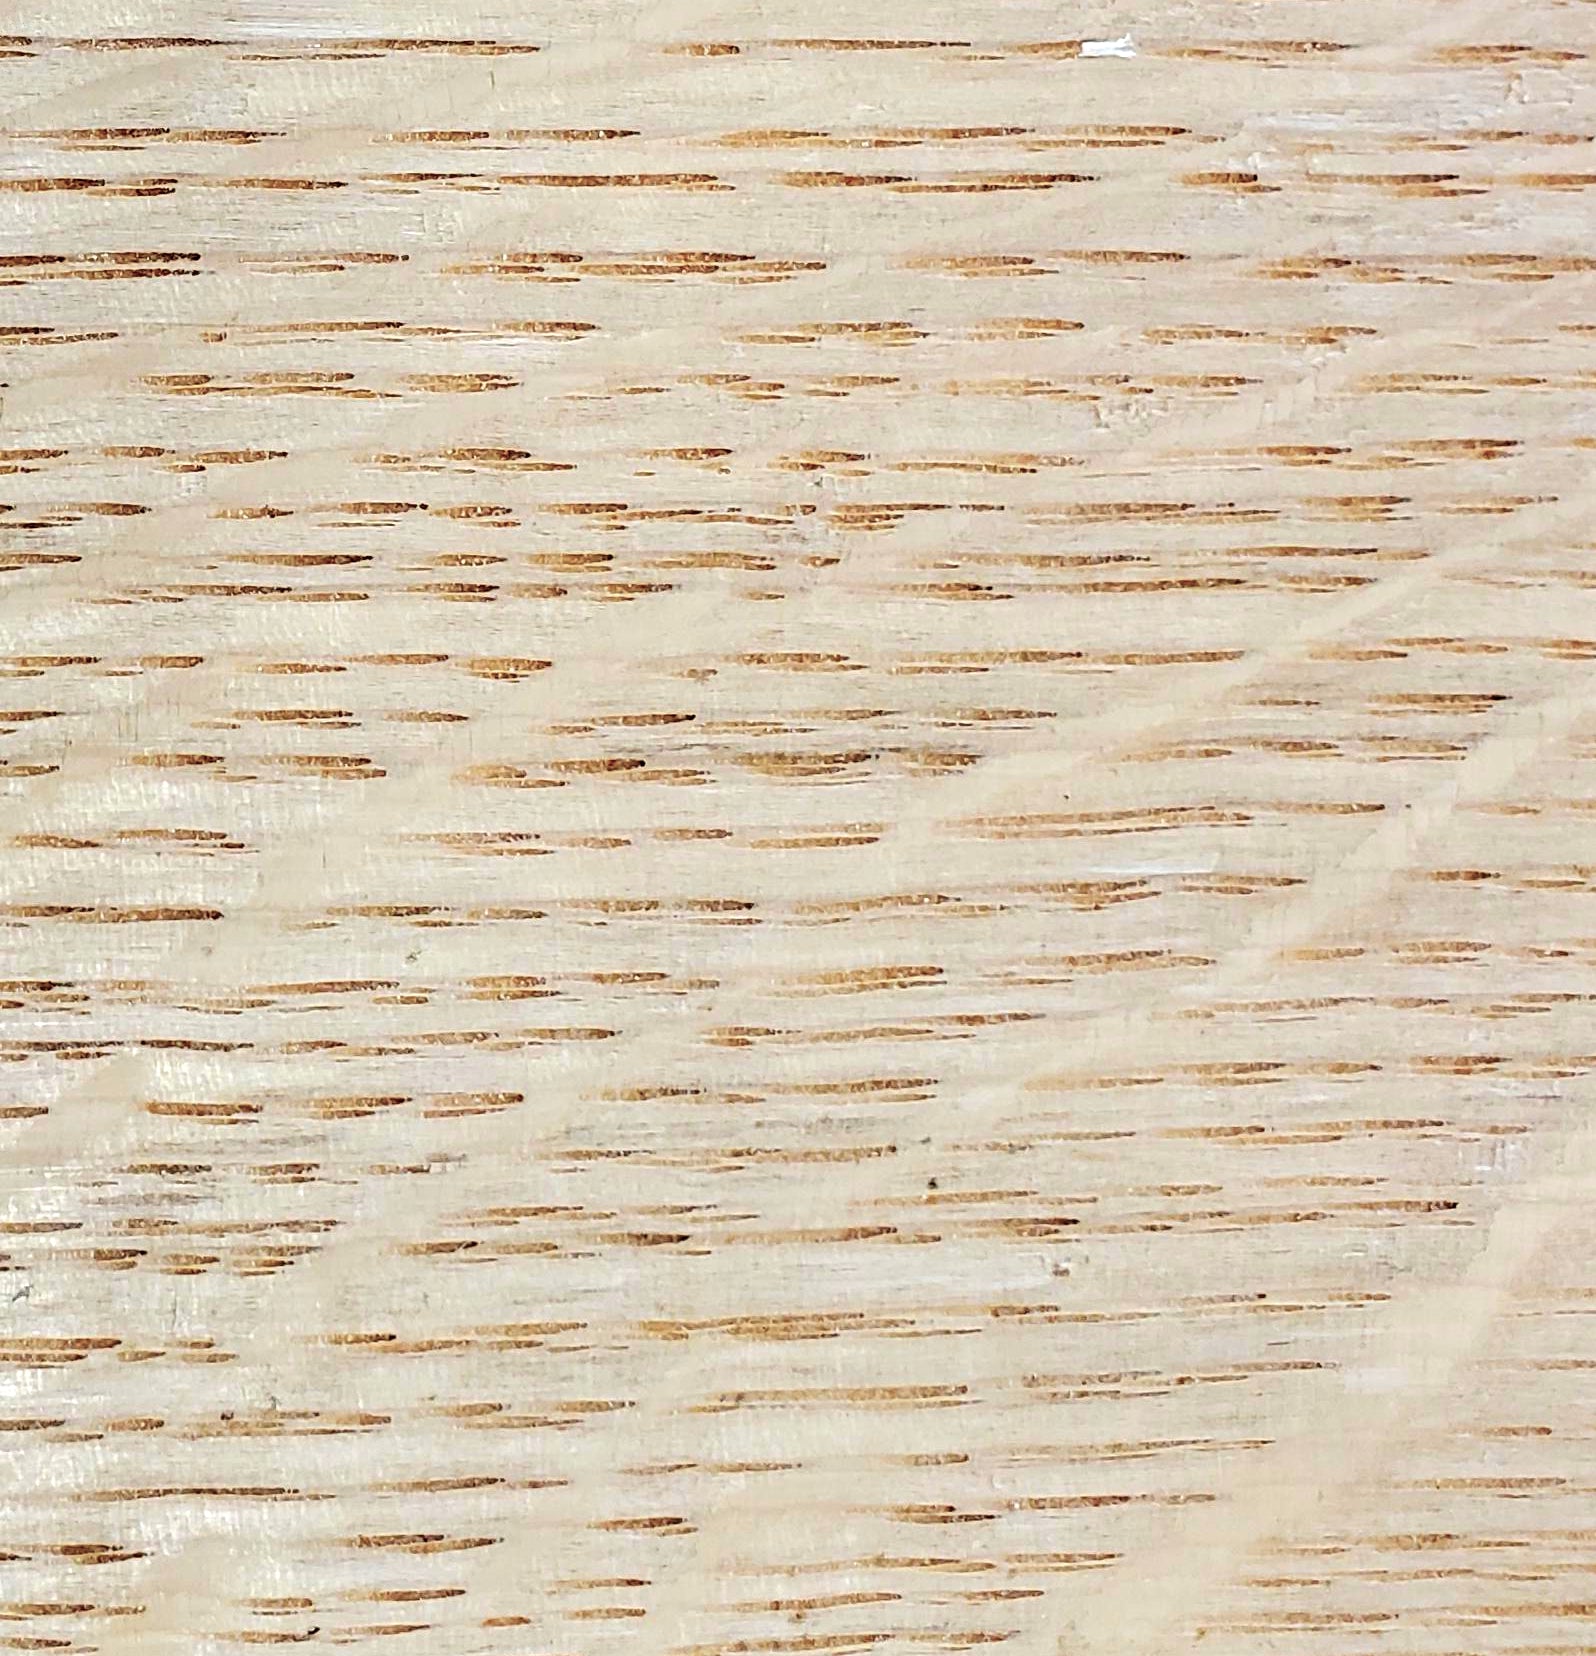 Oak, White Quartered - A&M Wood Specialty